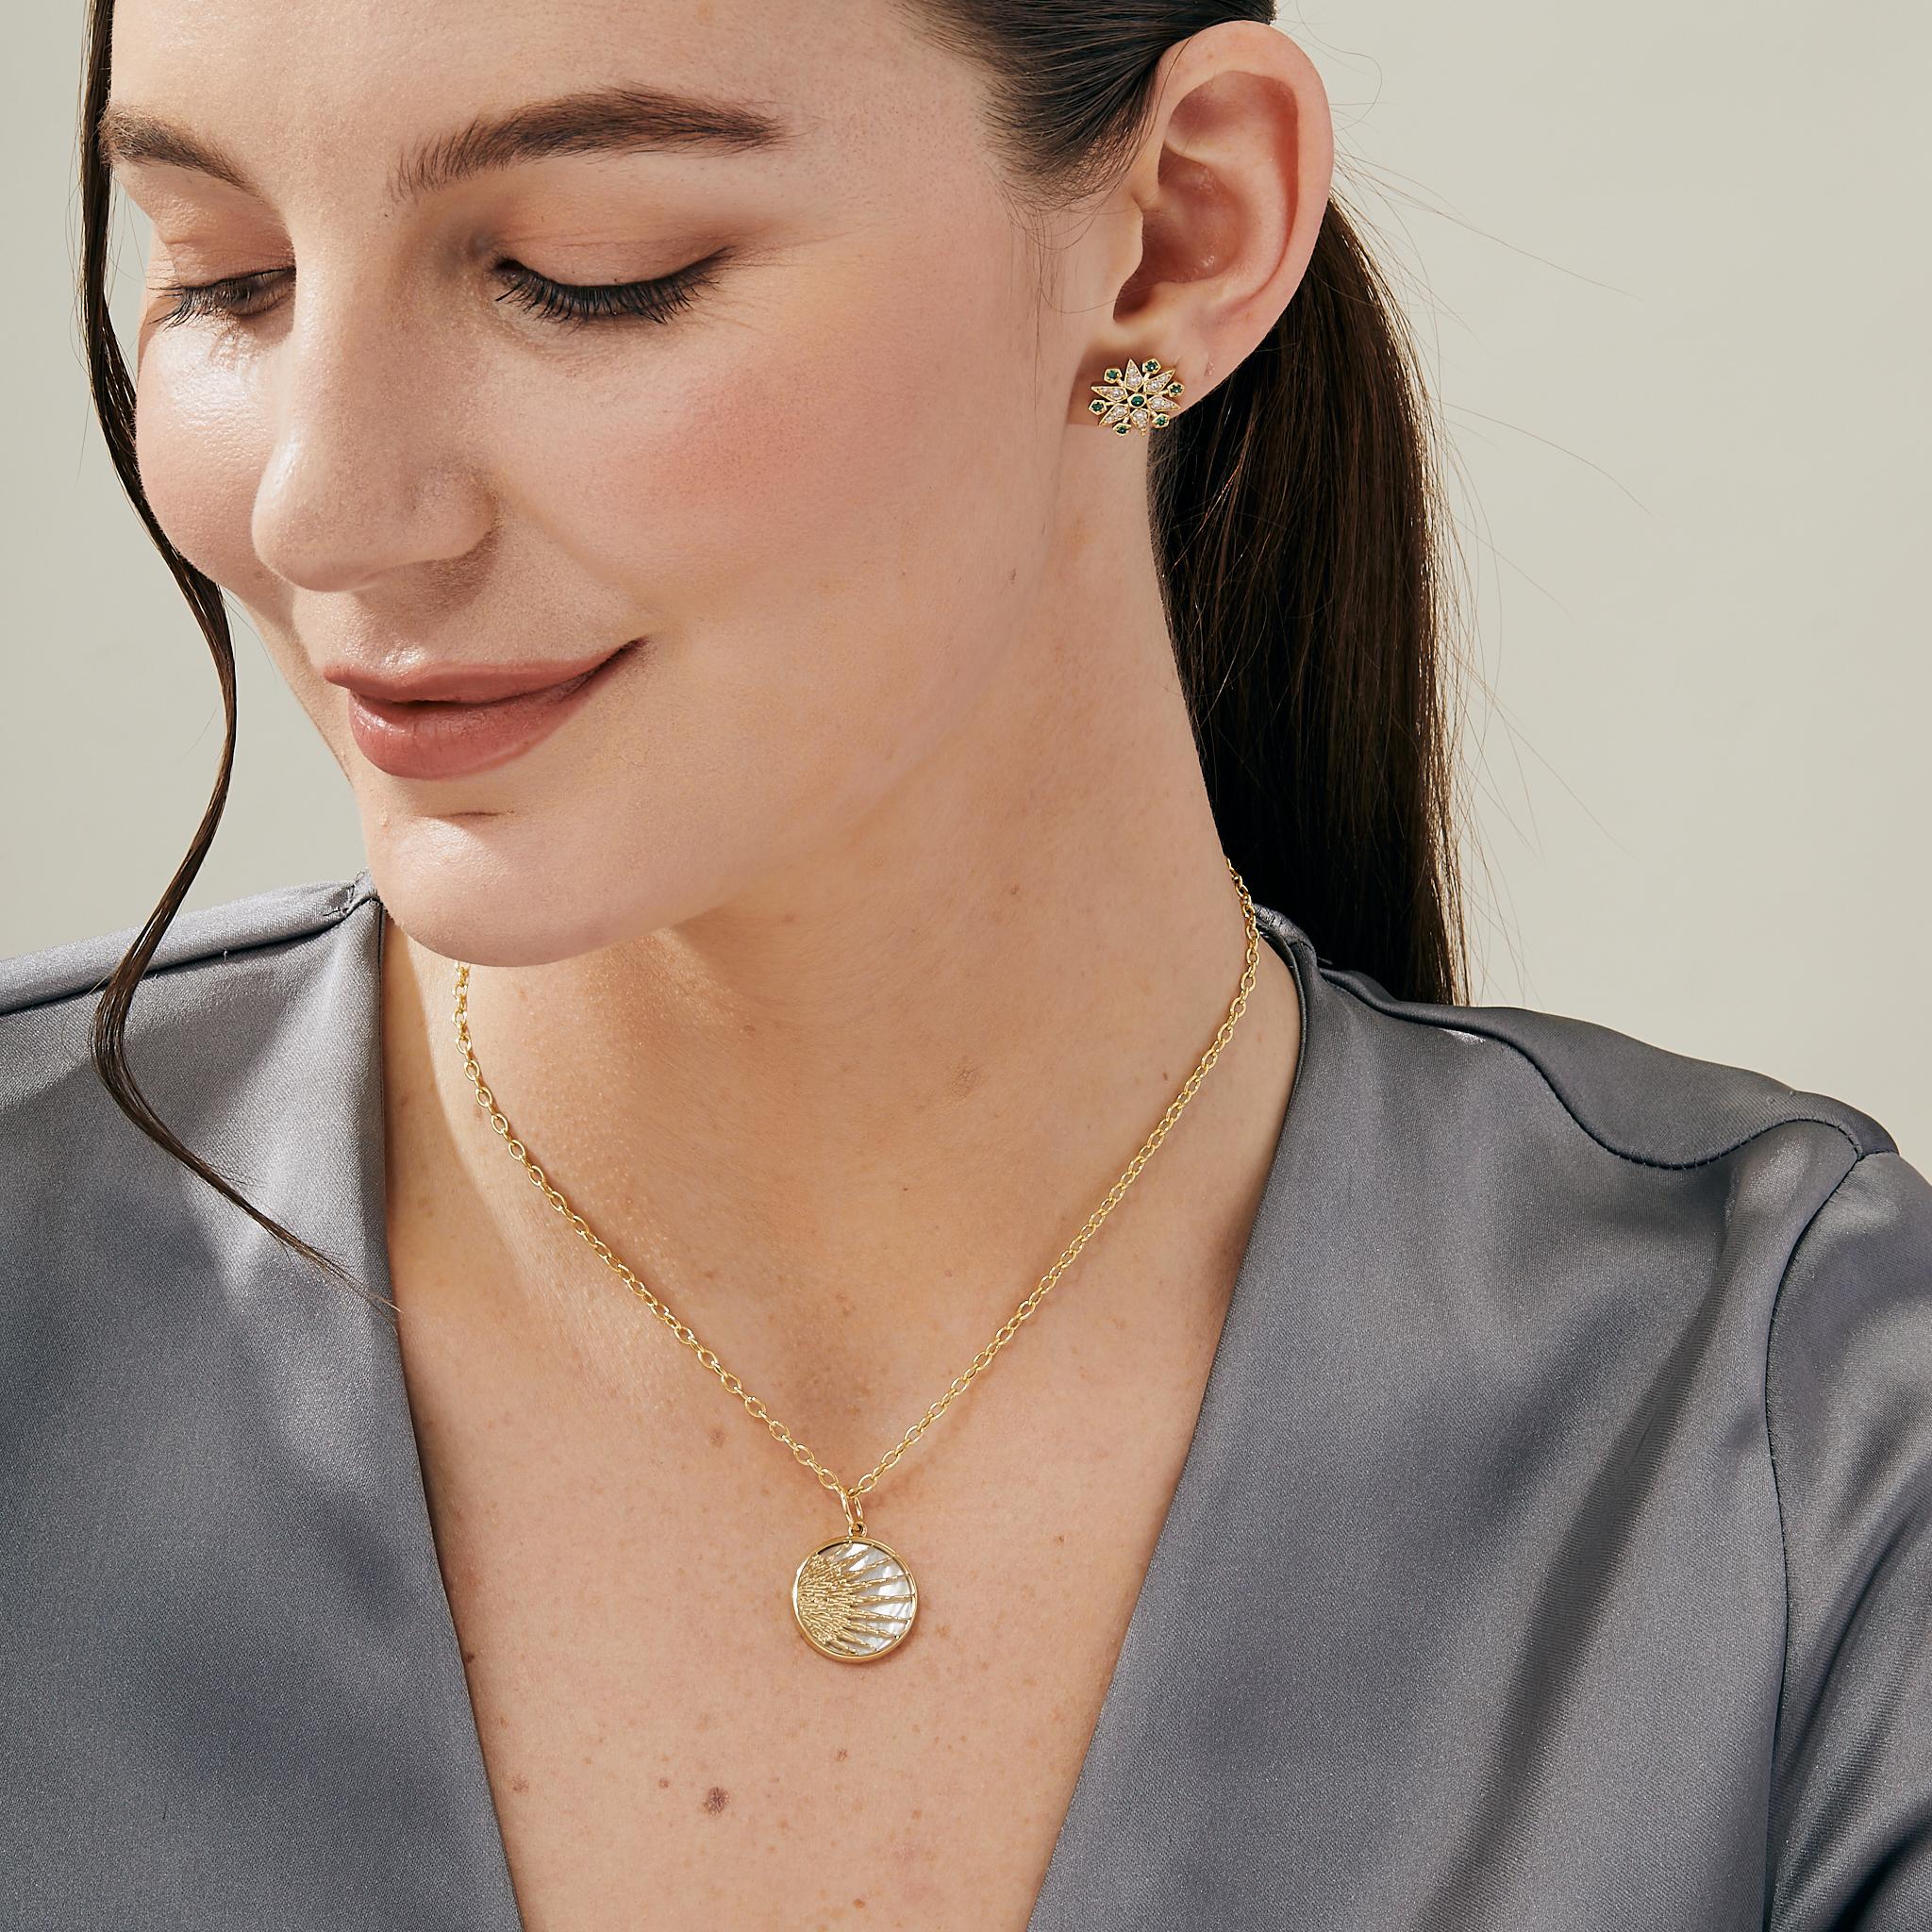 Created in 18 karat yellow gold
Mother of pearl 4.50 carats approx.
Chain sold separately
Limited Edition

Exquisitely crafted in 18k yellow gold, this limited-edition pendant features a captivating mother-of-pearl centerpiece of 4.50 carats. Please